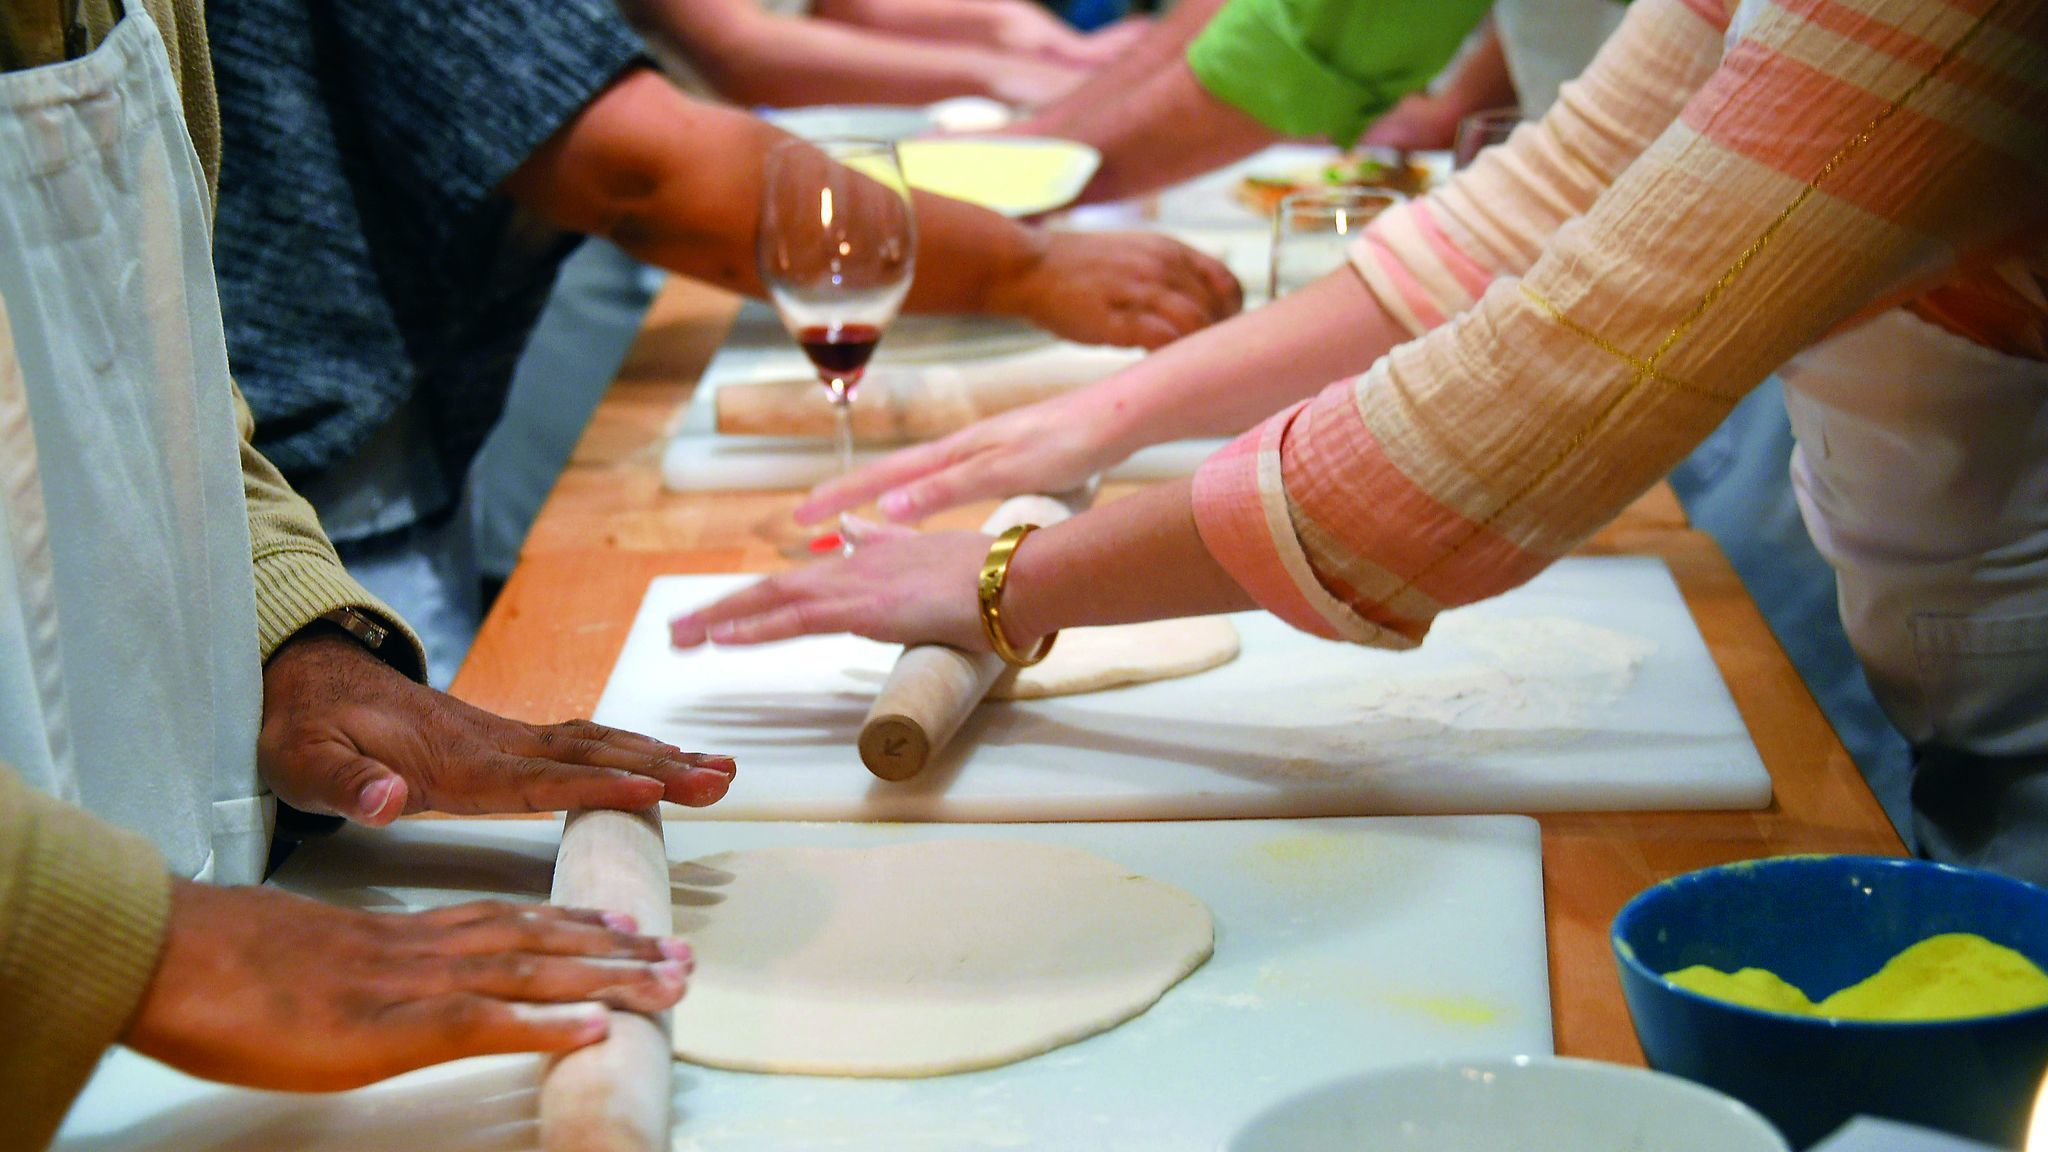 Baltimore, MD -- 11/16/2016 --Participants roll out dough during a class on making home pizza at Sch